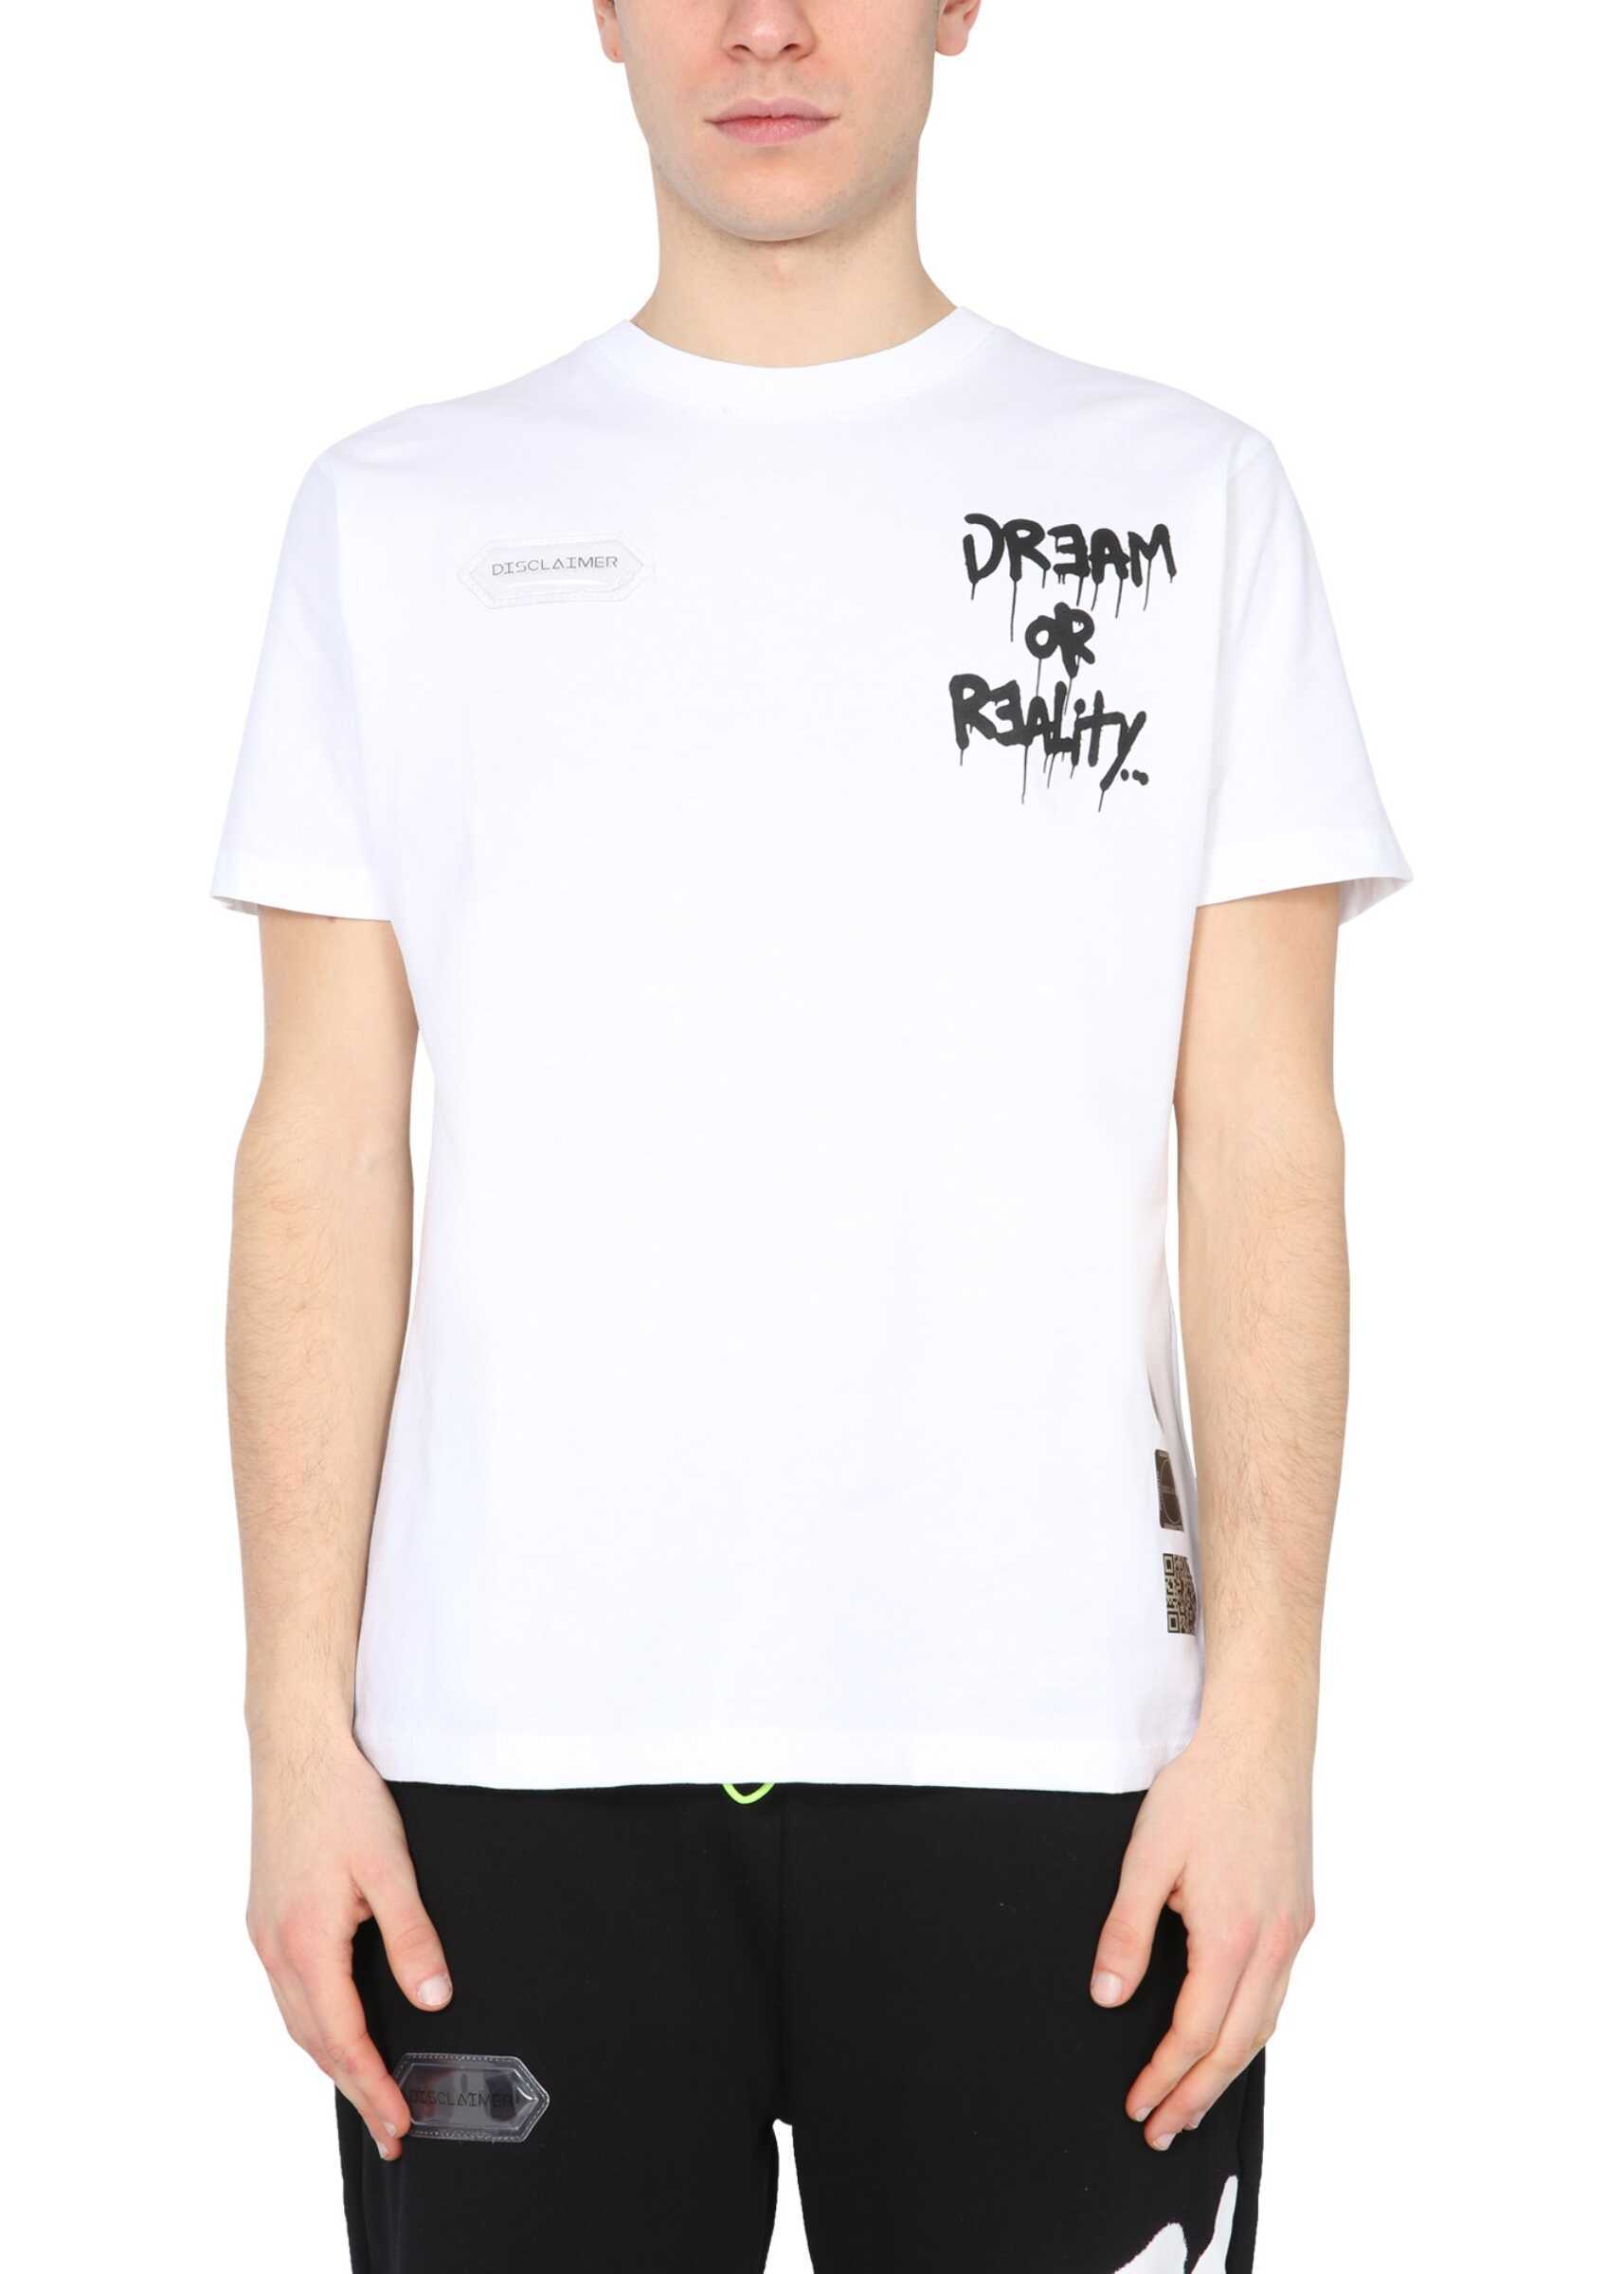 Disclaimer T-Shirt With Screen Print 21EDS50587_BIANCO WHITE